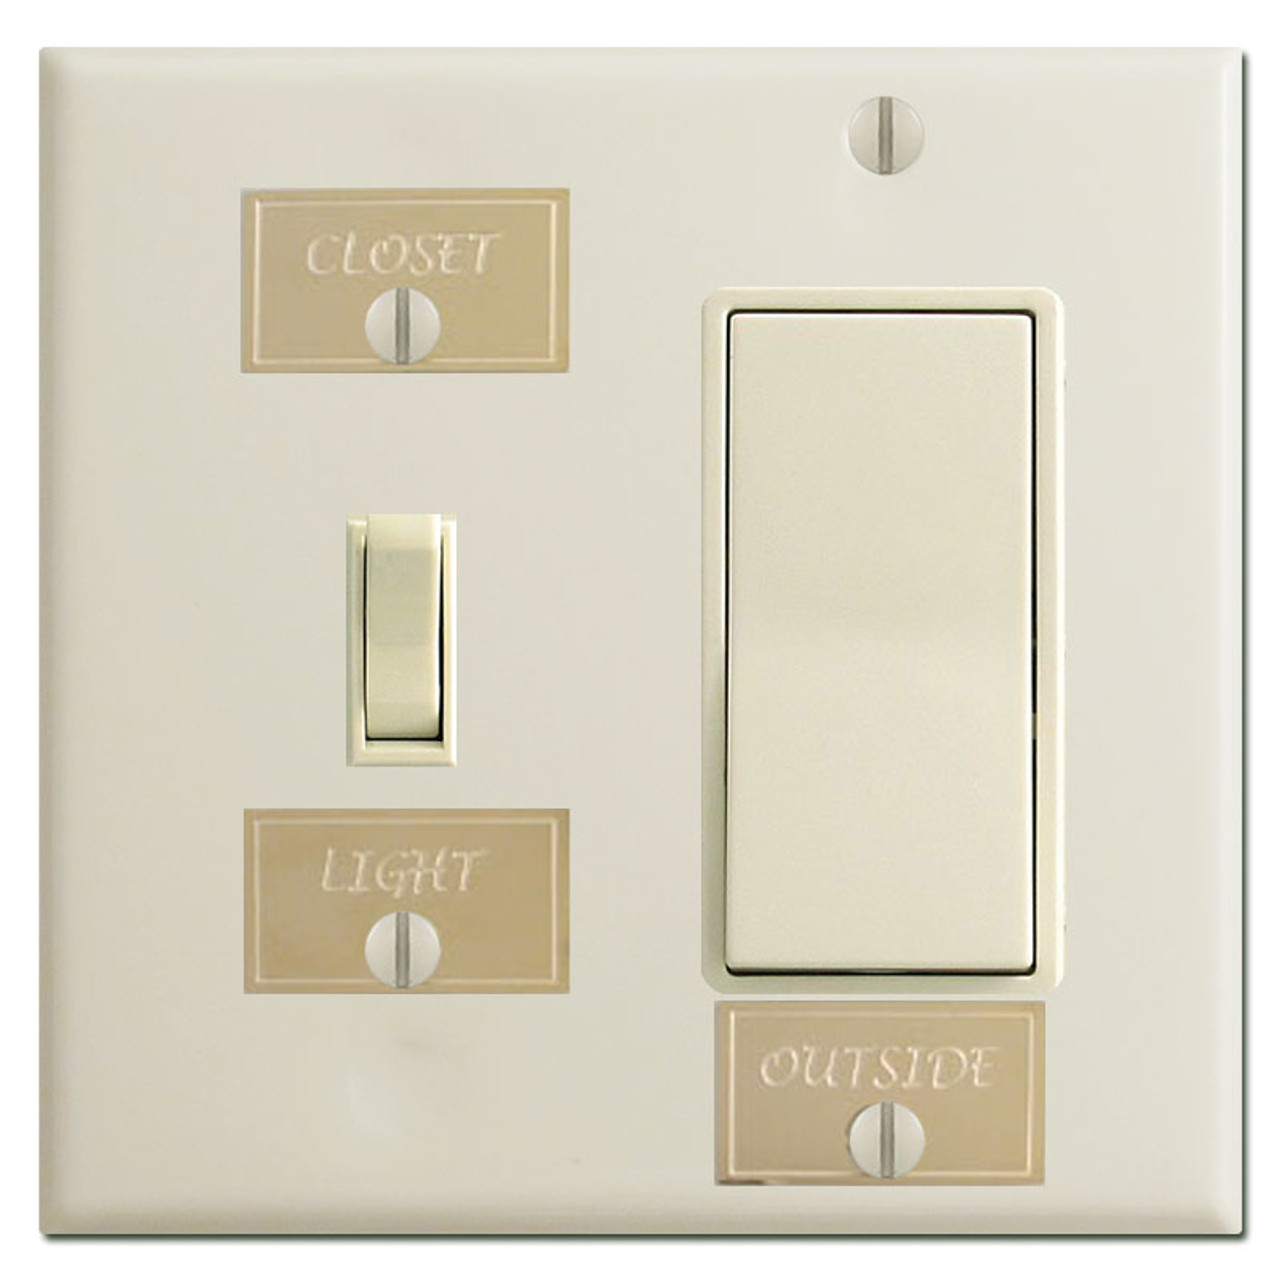 Gold Switch Identifier Tags for Light Switch Plate Covers